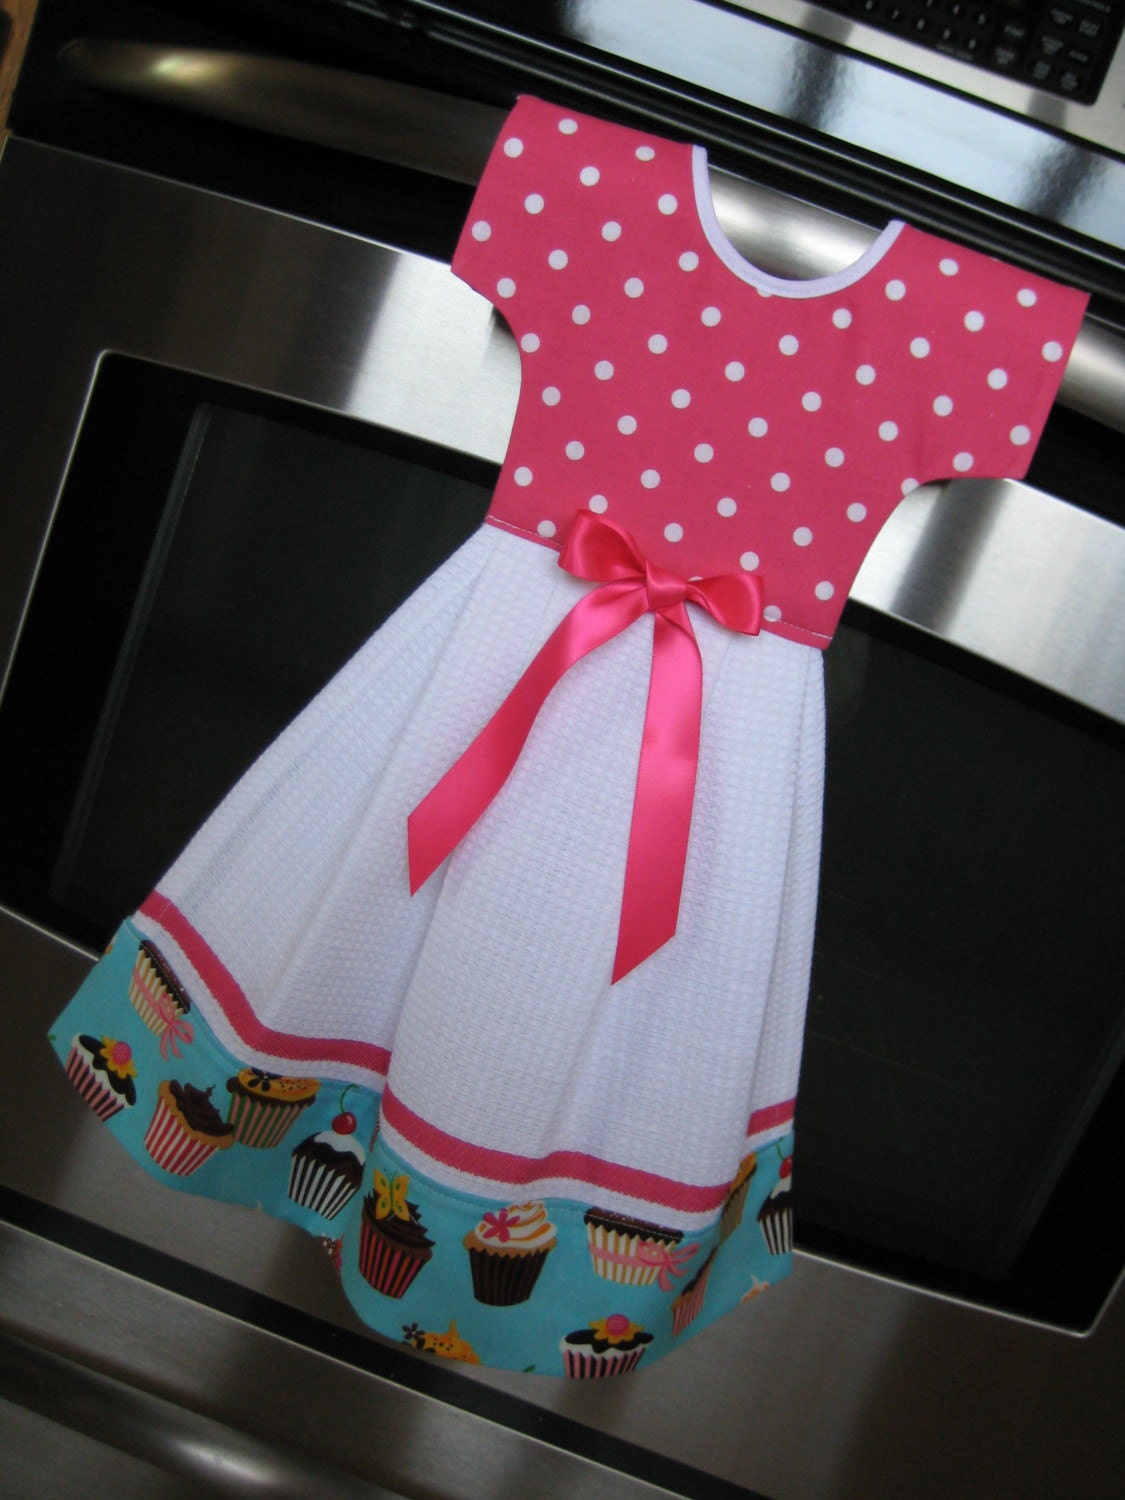 Dish Towel Dress for Oven Door Sweet Tooth Cupcake by buyhand